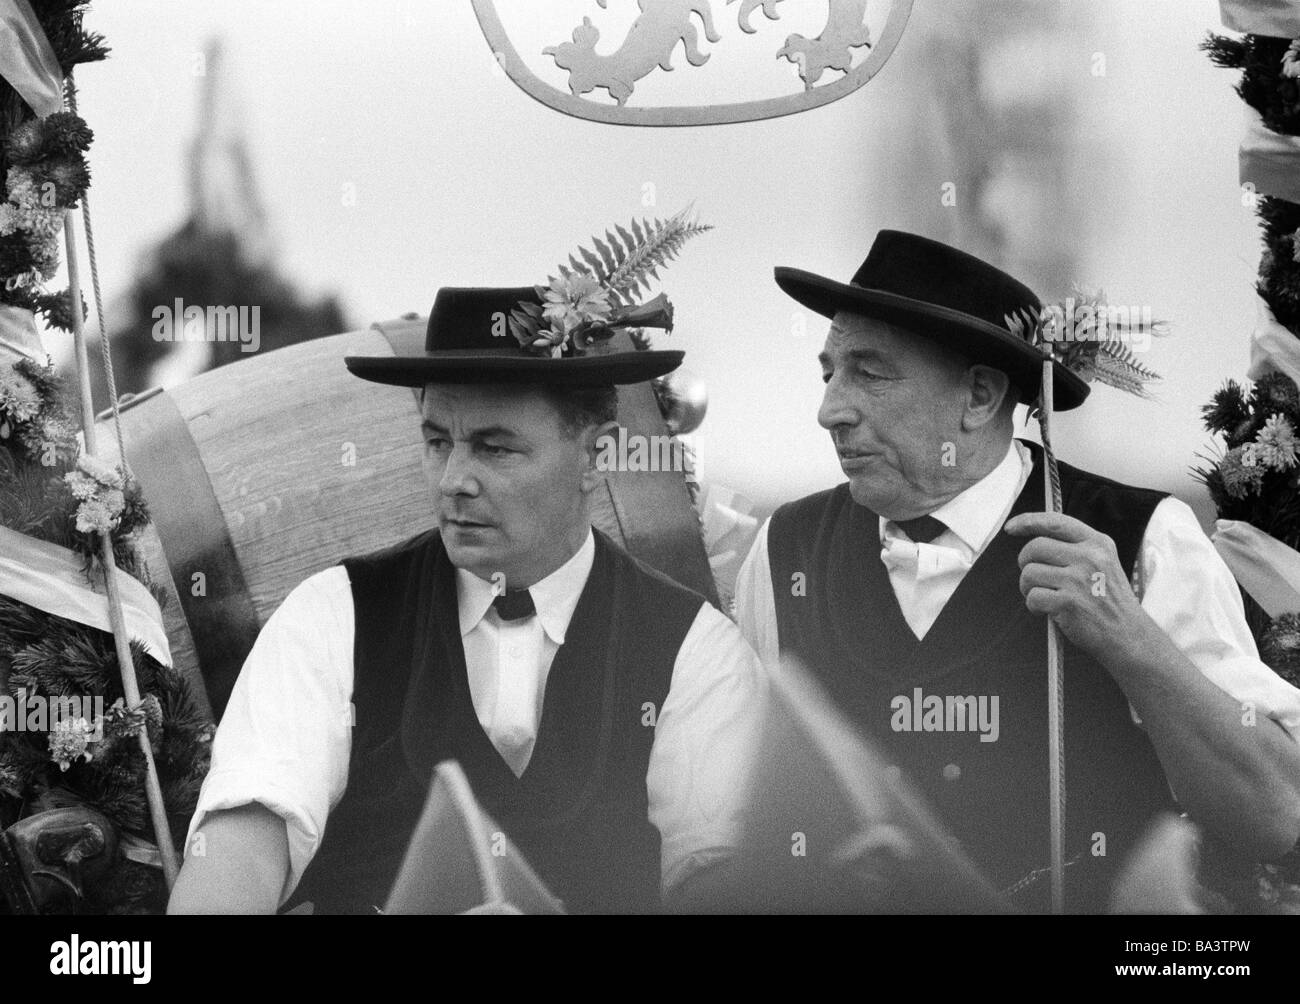 Sixties, black and white photo, folk festival, Munich Beer Festival 1966, Entry of the Oktoberfest Staff and Breweries, traditional costume parade, two men, aged 30 to 40 years, aged 60 to 70 years, D-Munich, Isar, Upper Bavaria, Bavaria Stock Photo